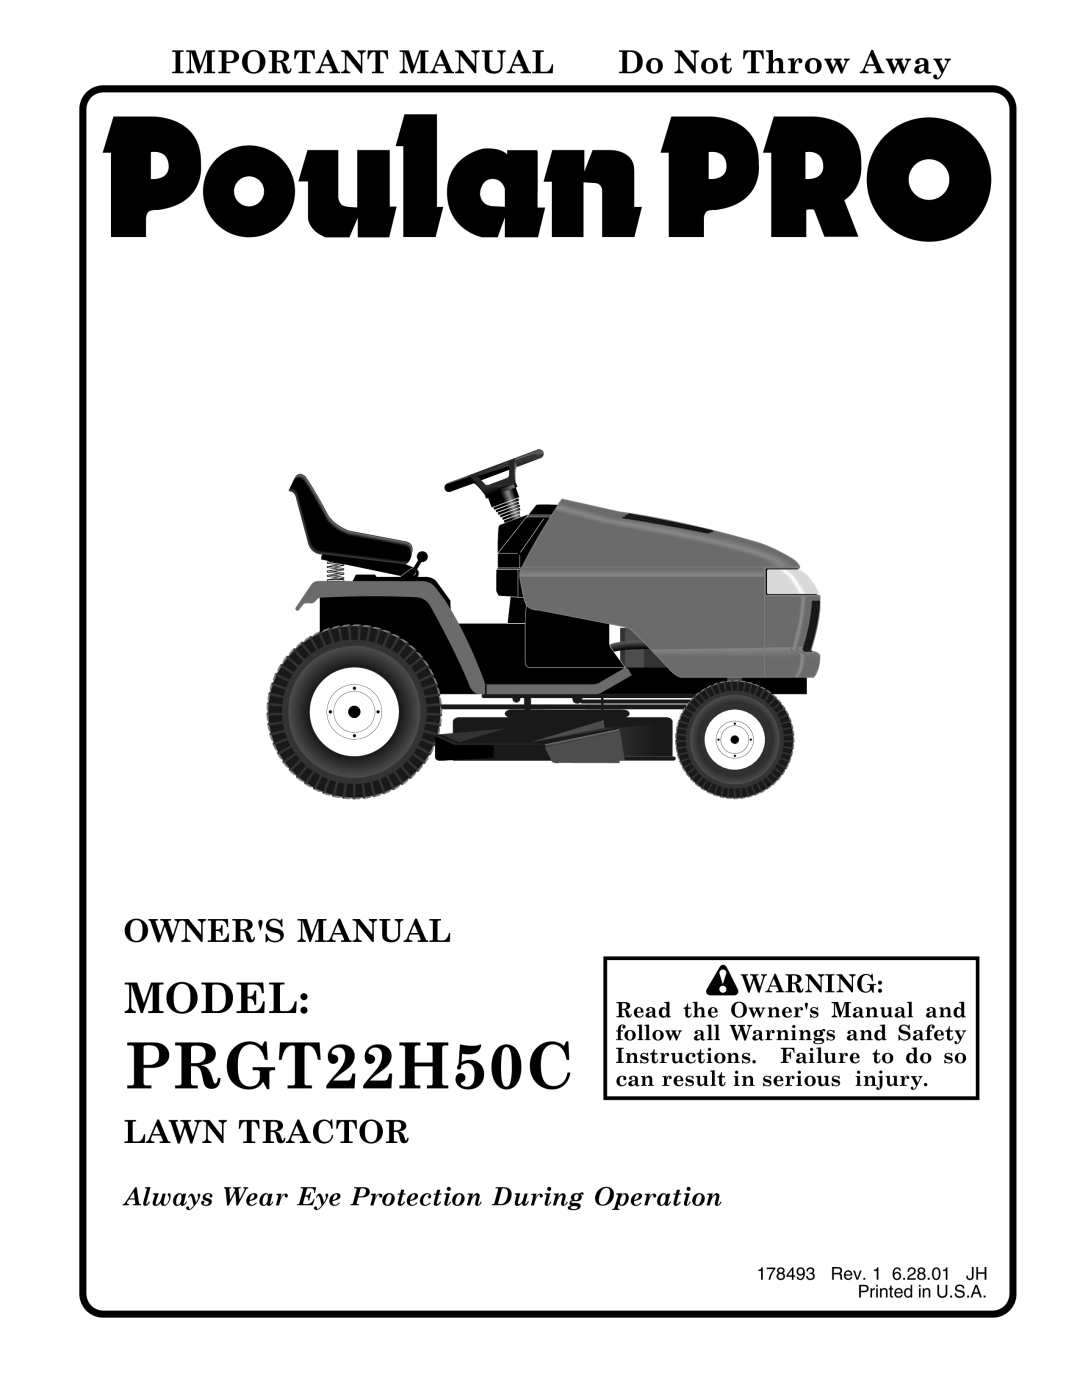 Poulan PRGT22H50C owner manual Model, IMPORTANT MANUAL Do Not Throw Away, Lawn Tractor 